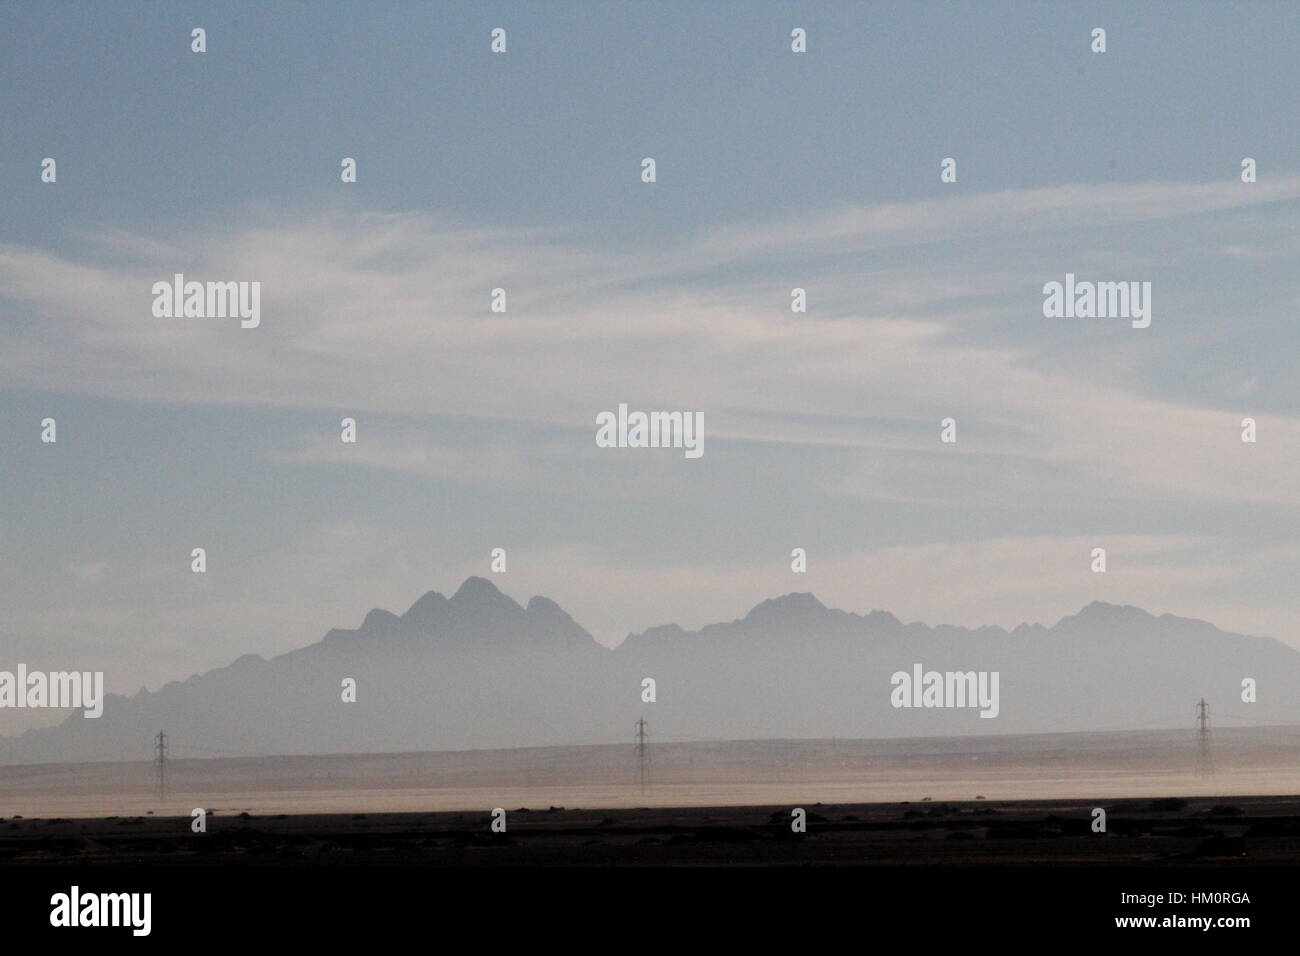 Desert with misty mountains in a B.G .On the way from Cairo to Hurghada, Egypt. Stock Photo